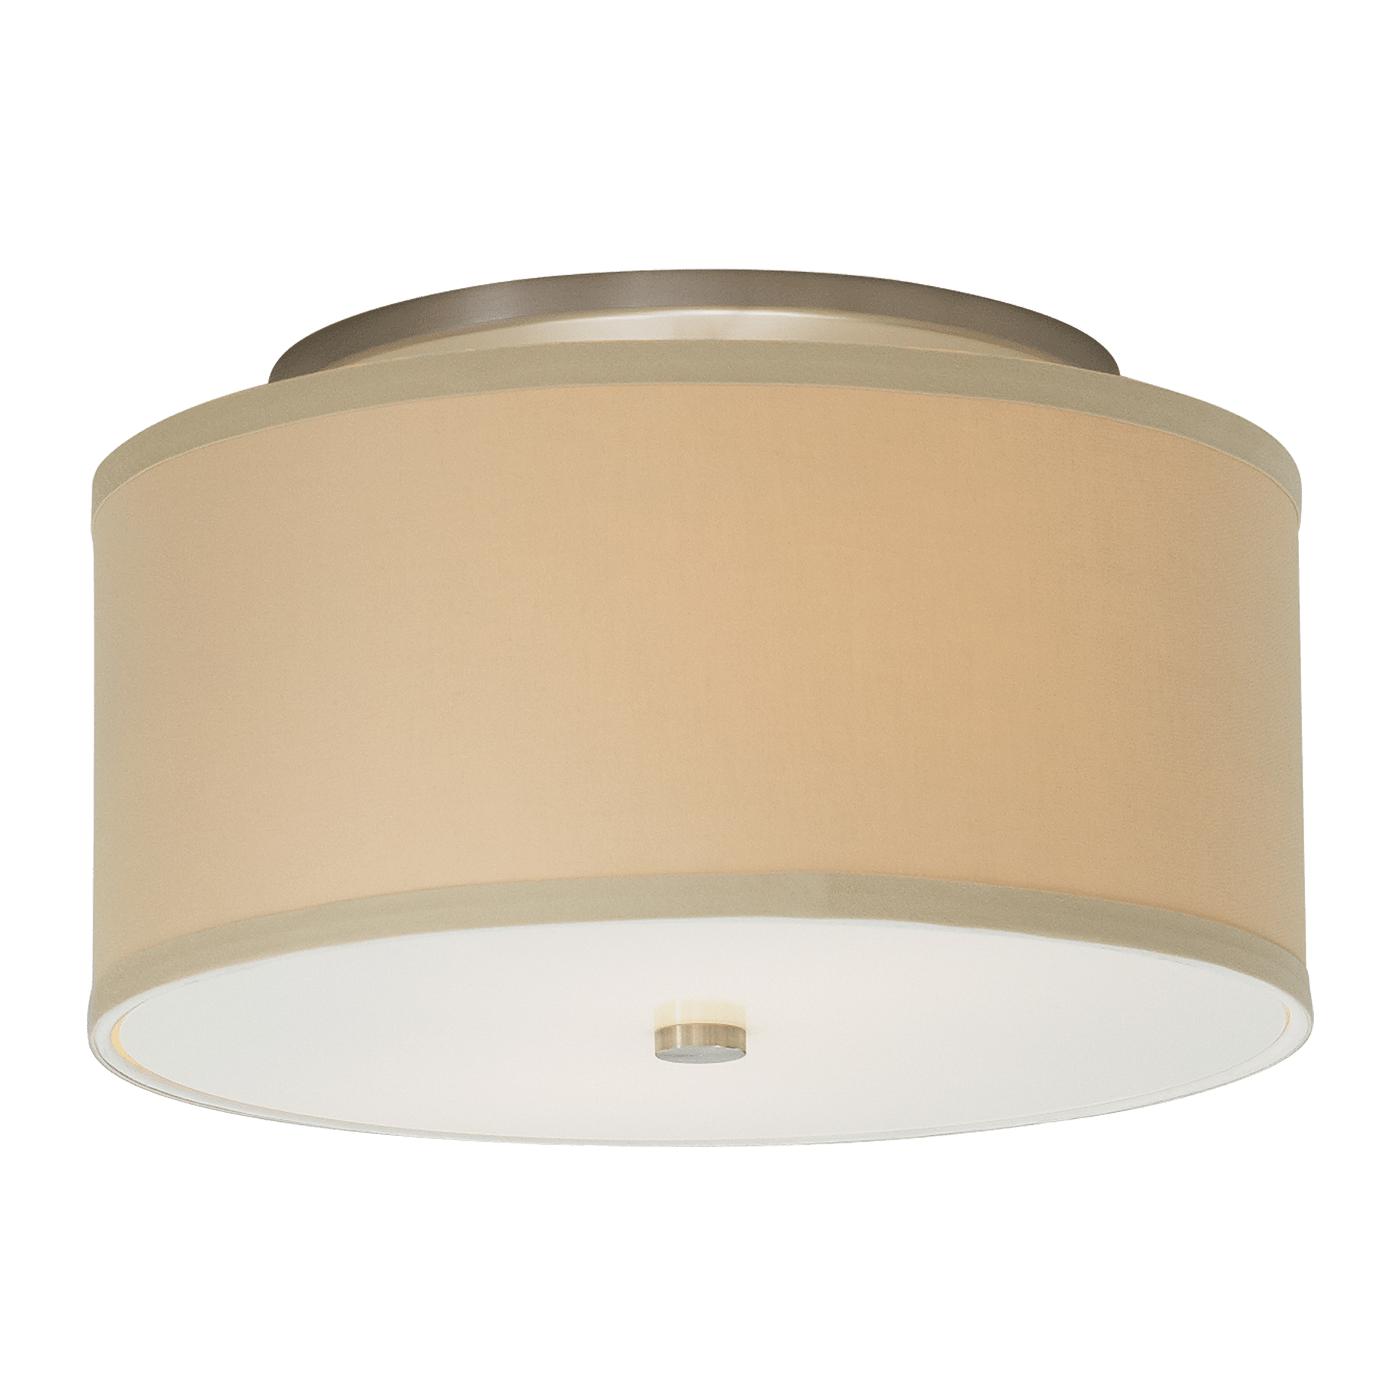 Satin Nickel Desert Clay Small Lamp Not Included